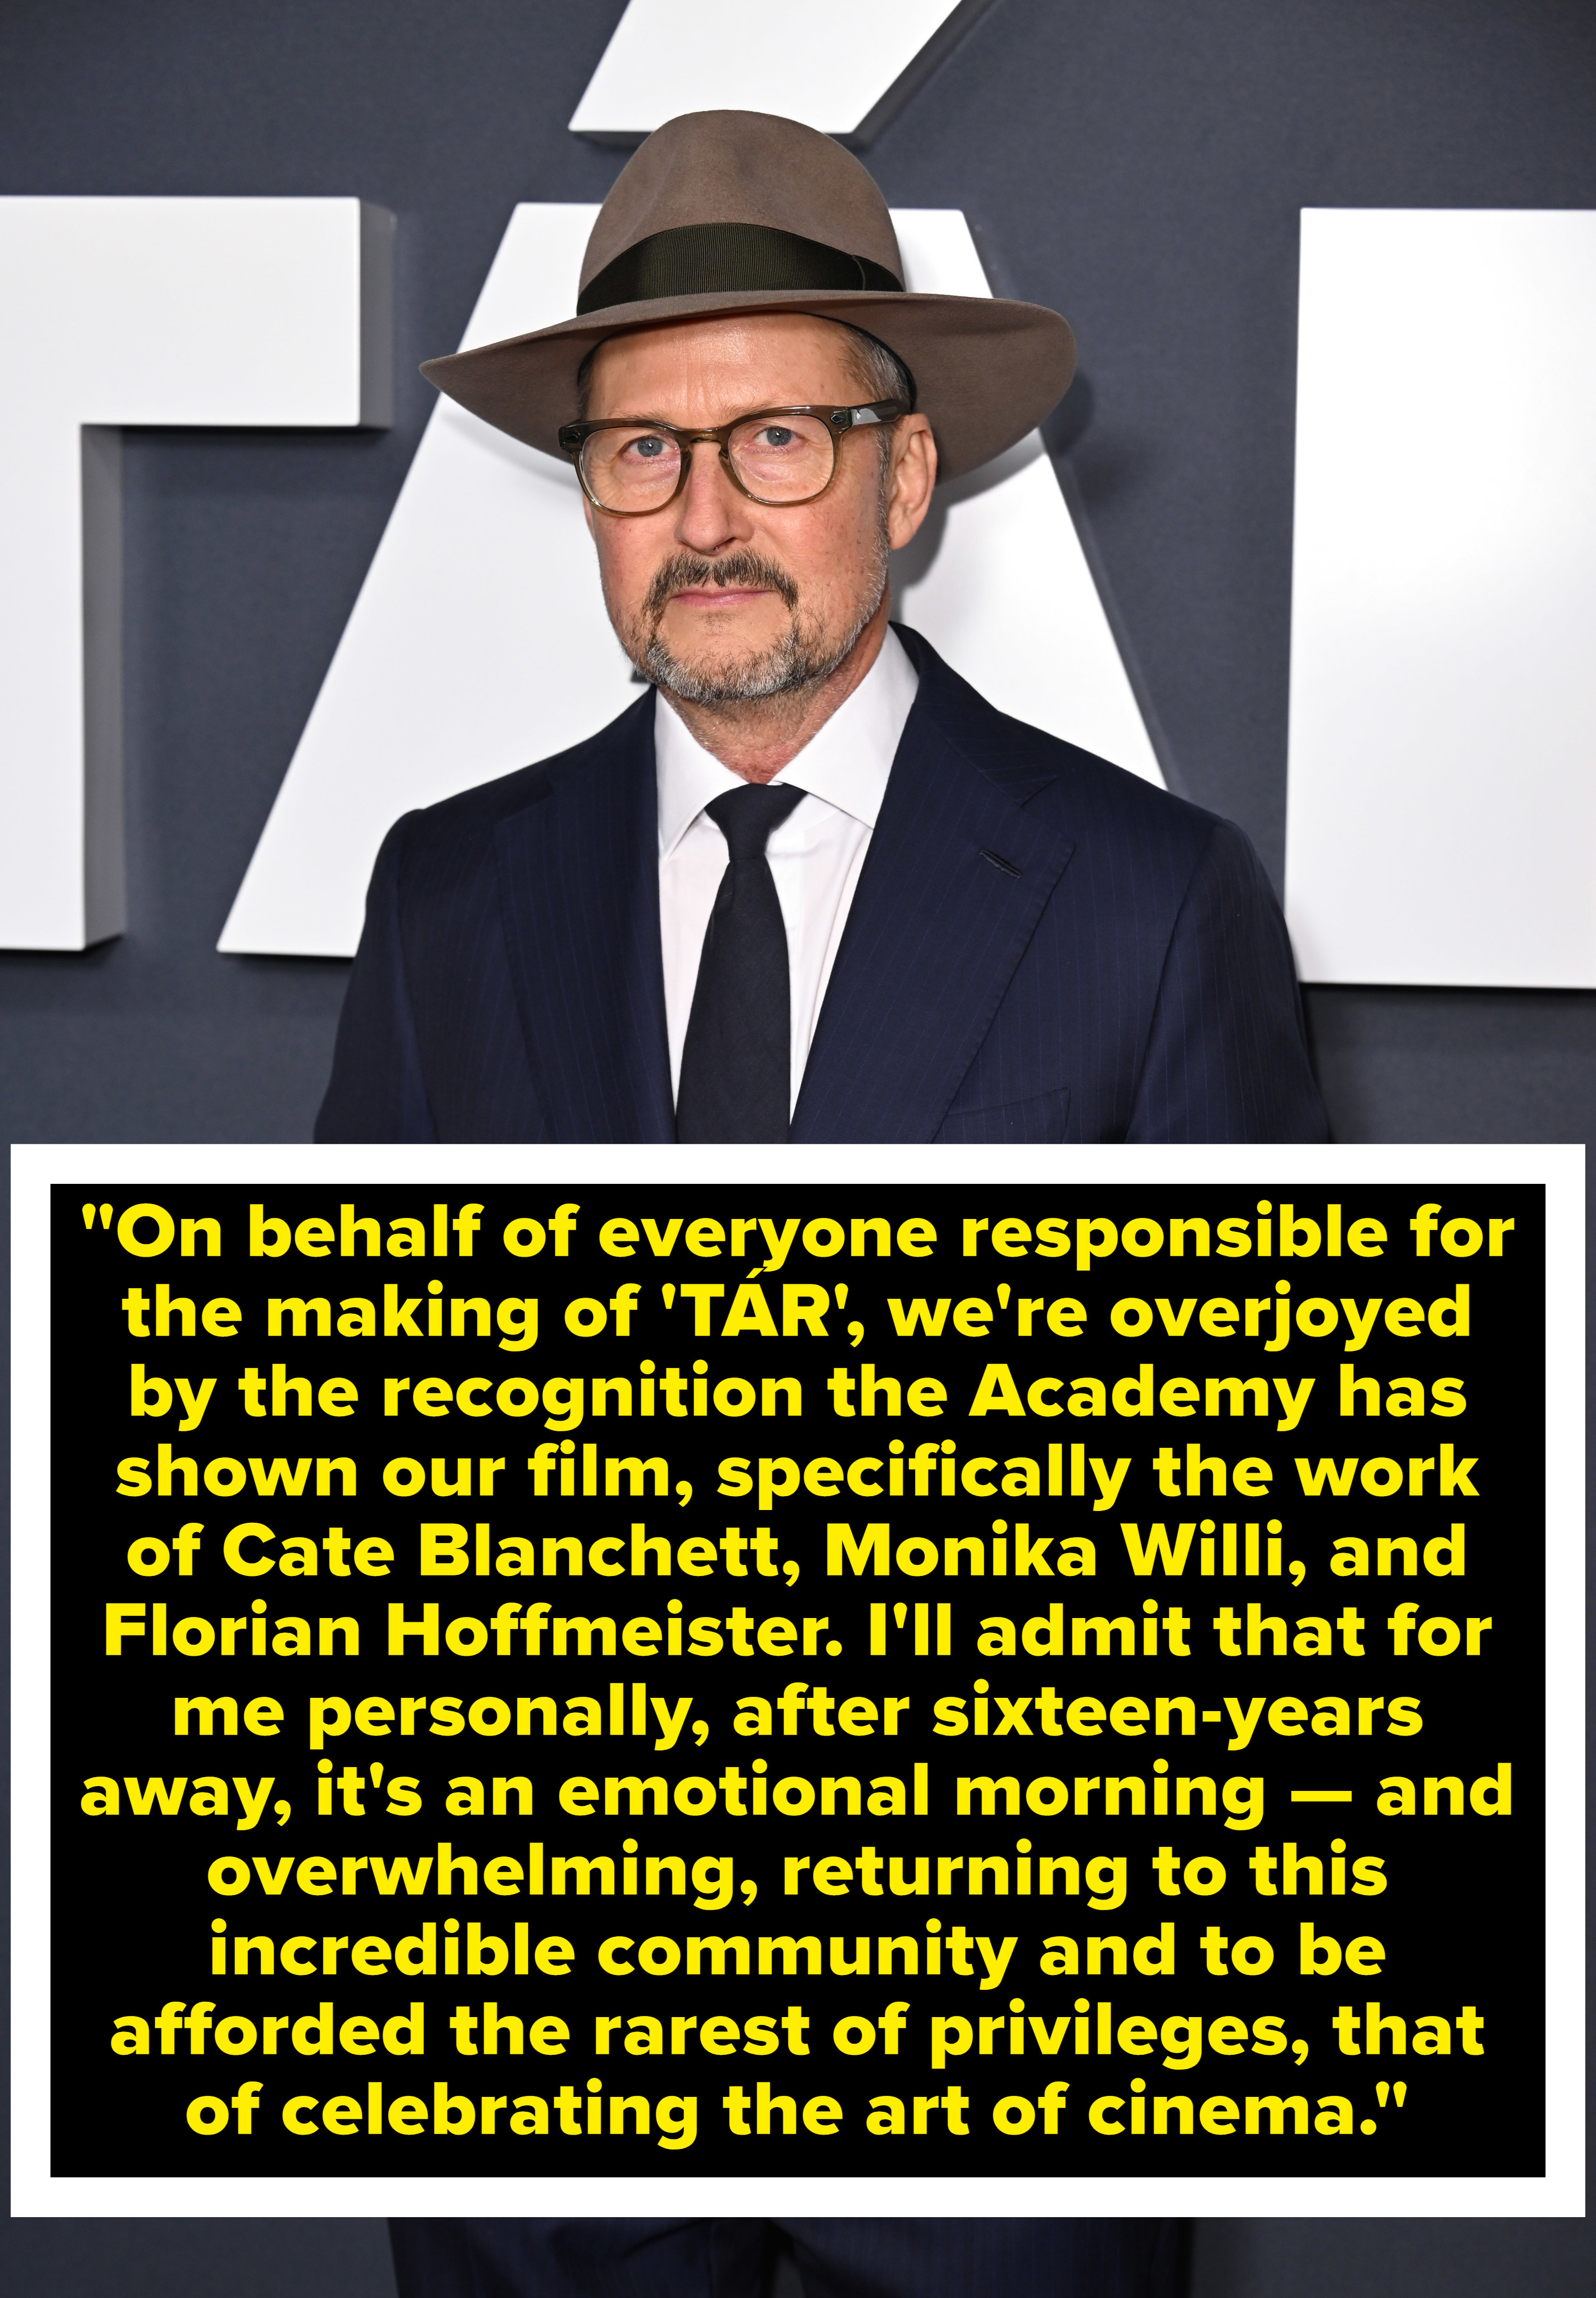 &quot;On behalf of everyone  responsible for the making of Tár, we&#x27;re overjoyed by the recognition the Academy has shown our film, specifically the work of Cate Blanchett, Monika Willi, and Florian Hoffmeister&quot;